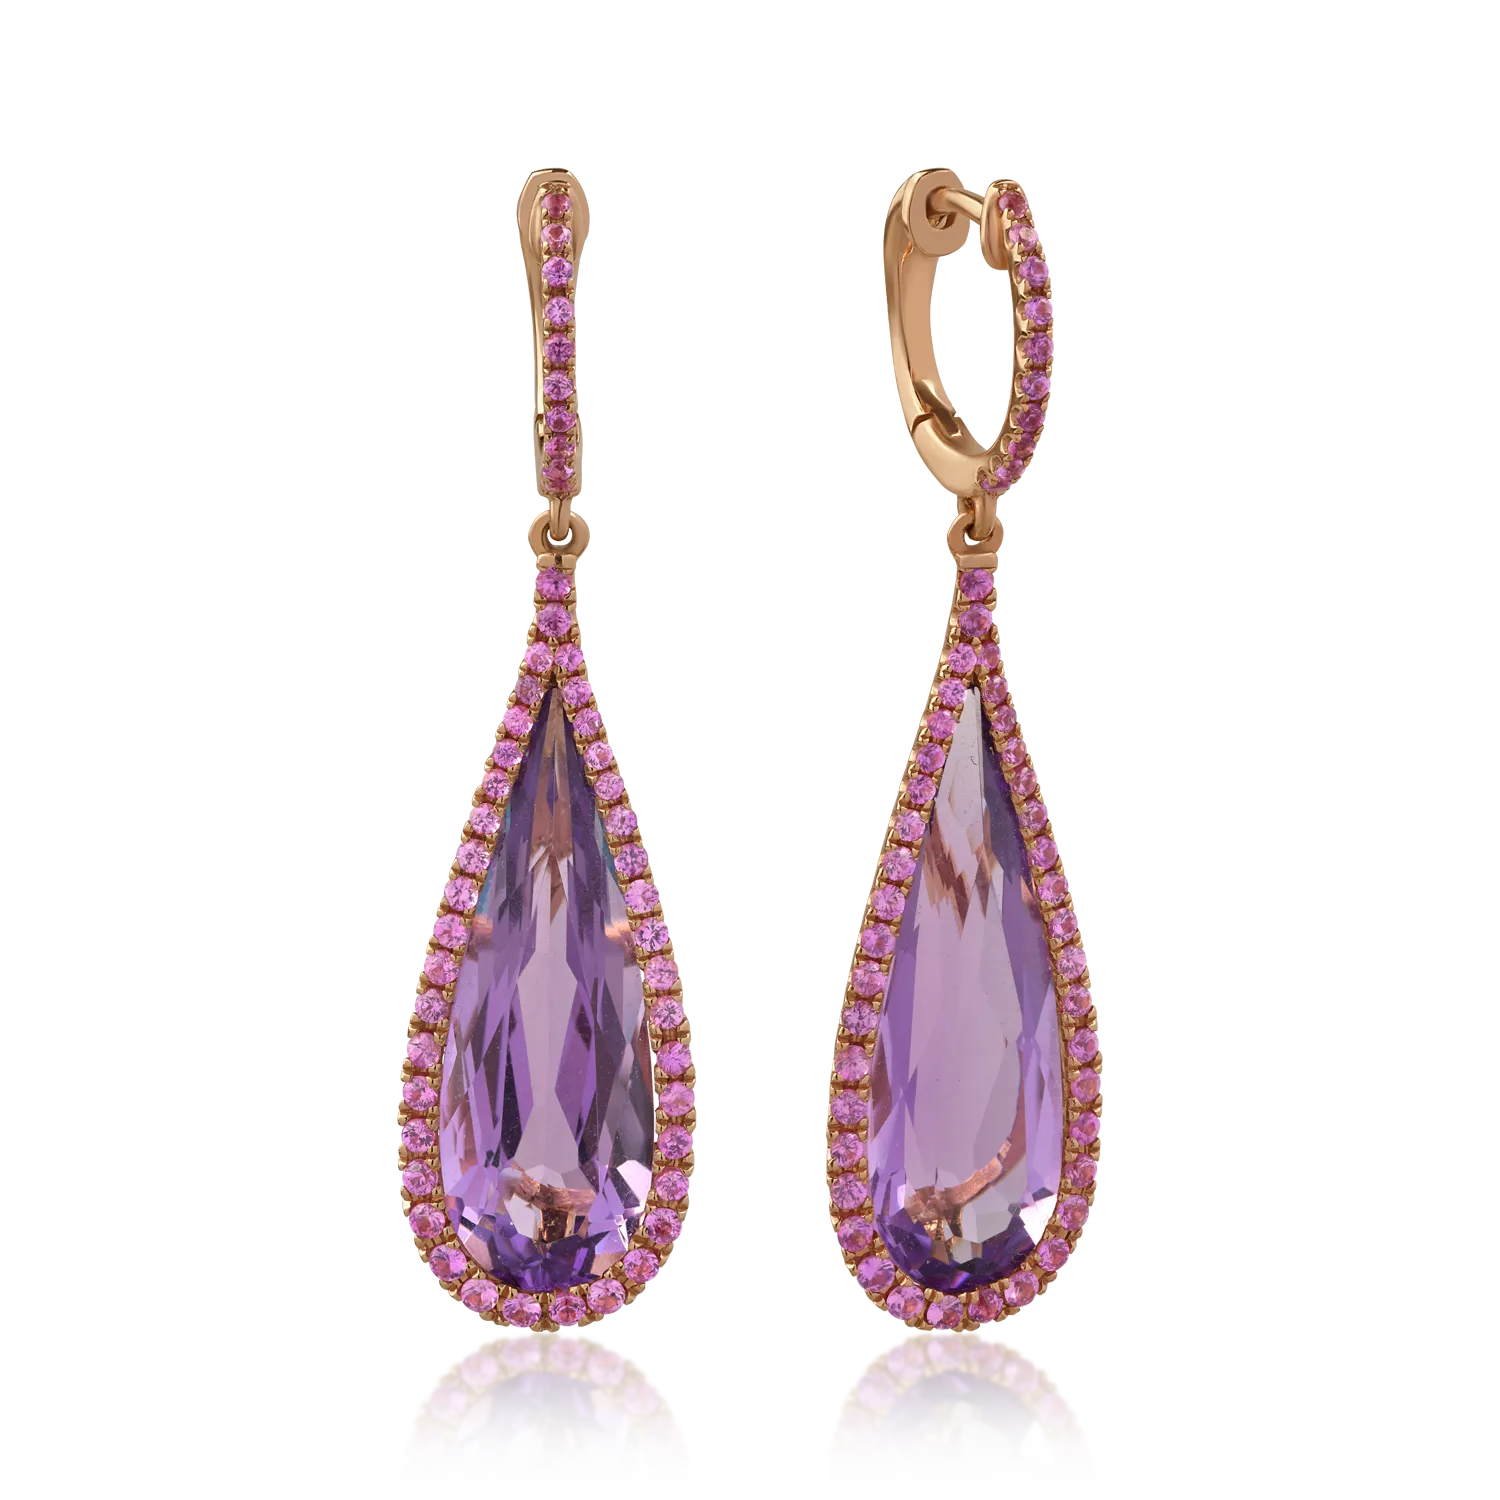 18K rose gold earrings with 12.2ct amethysts and 1.08ct pink sapphires